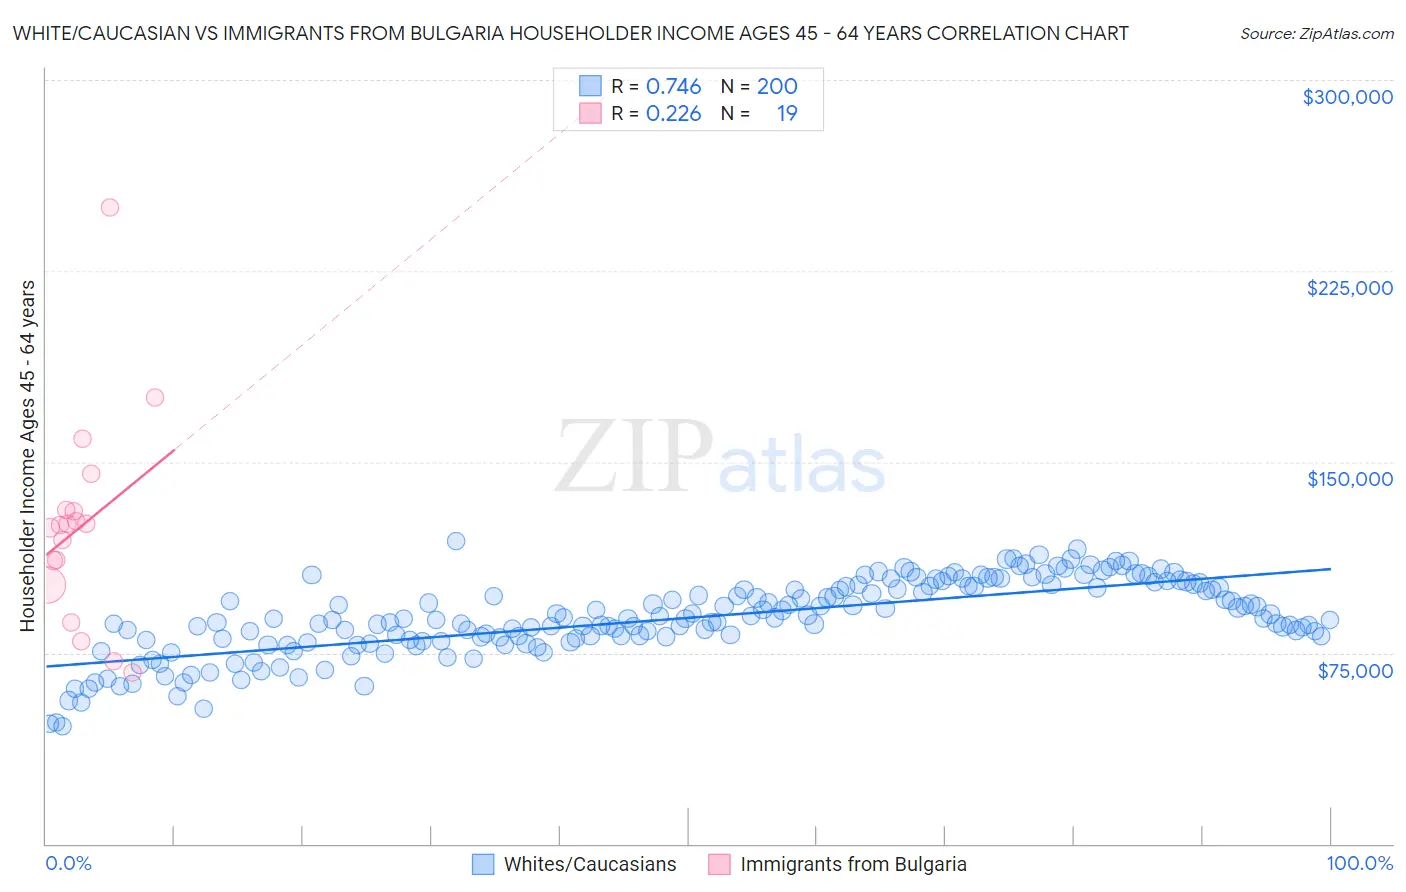 White/Caucasian vs Immigrants from Bulgaria Householder Income Ages 45 - 64 years